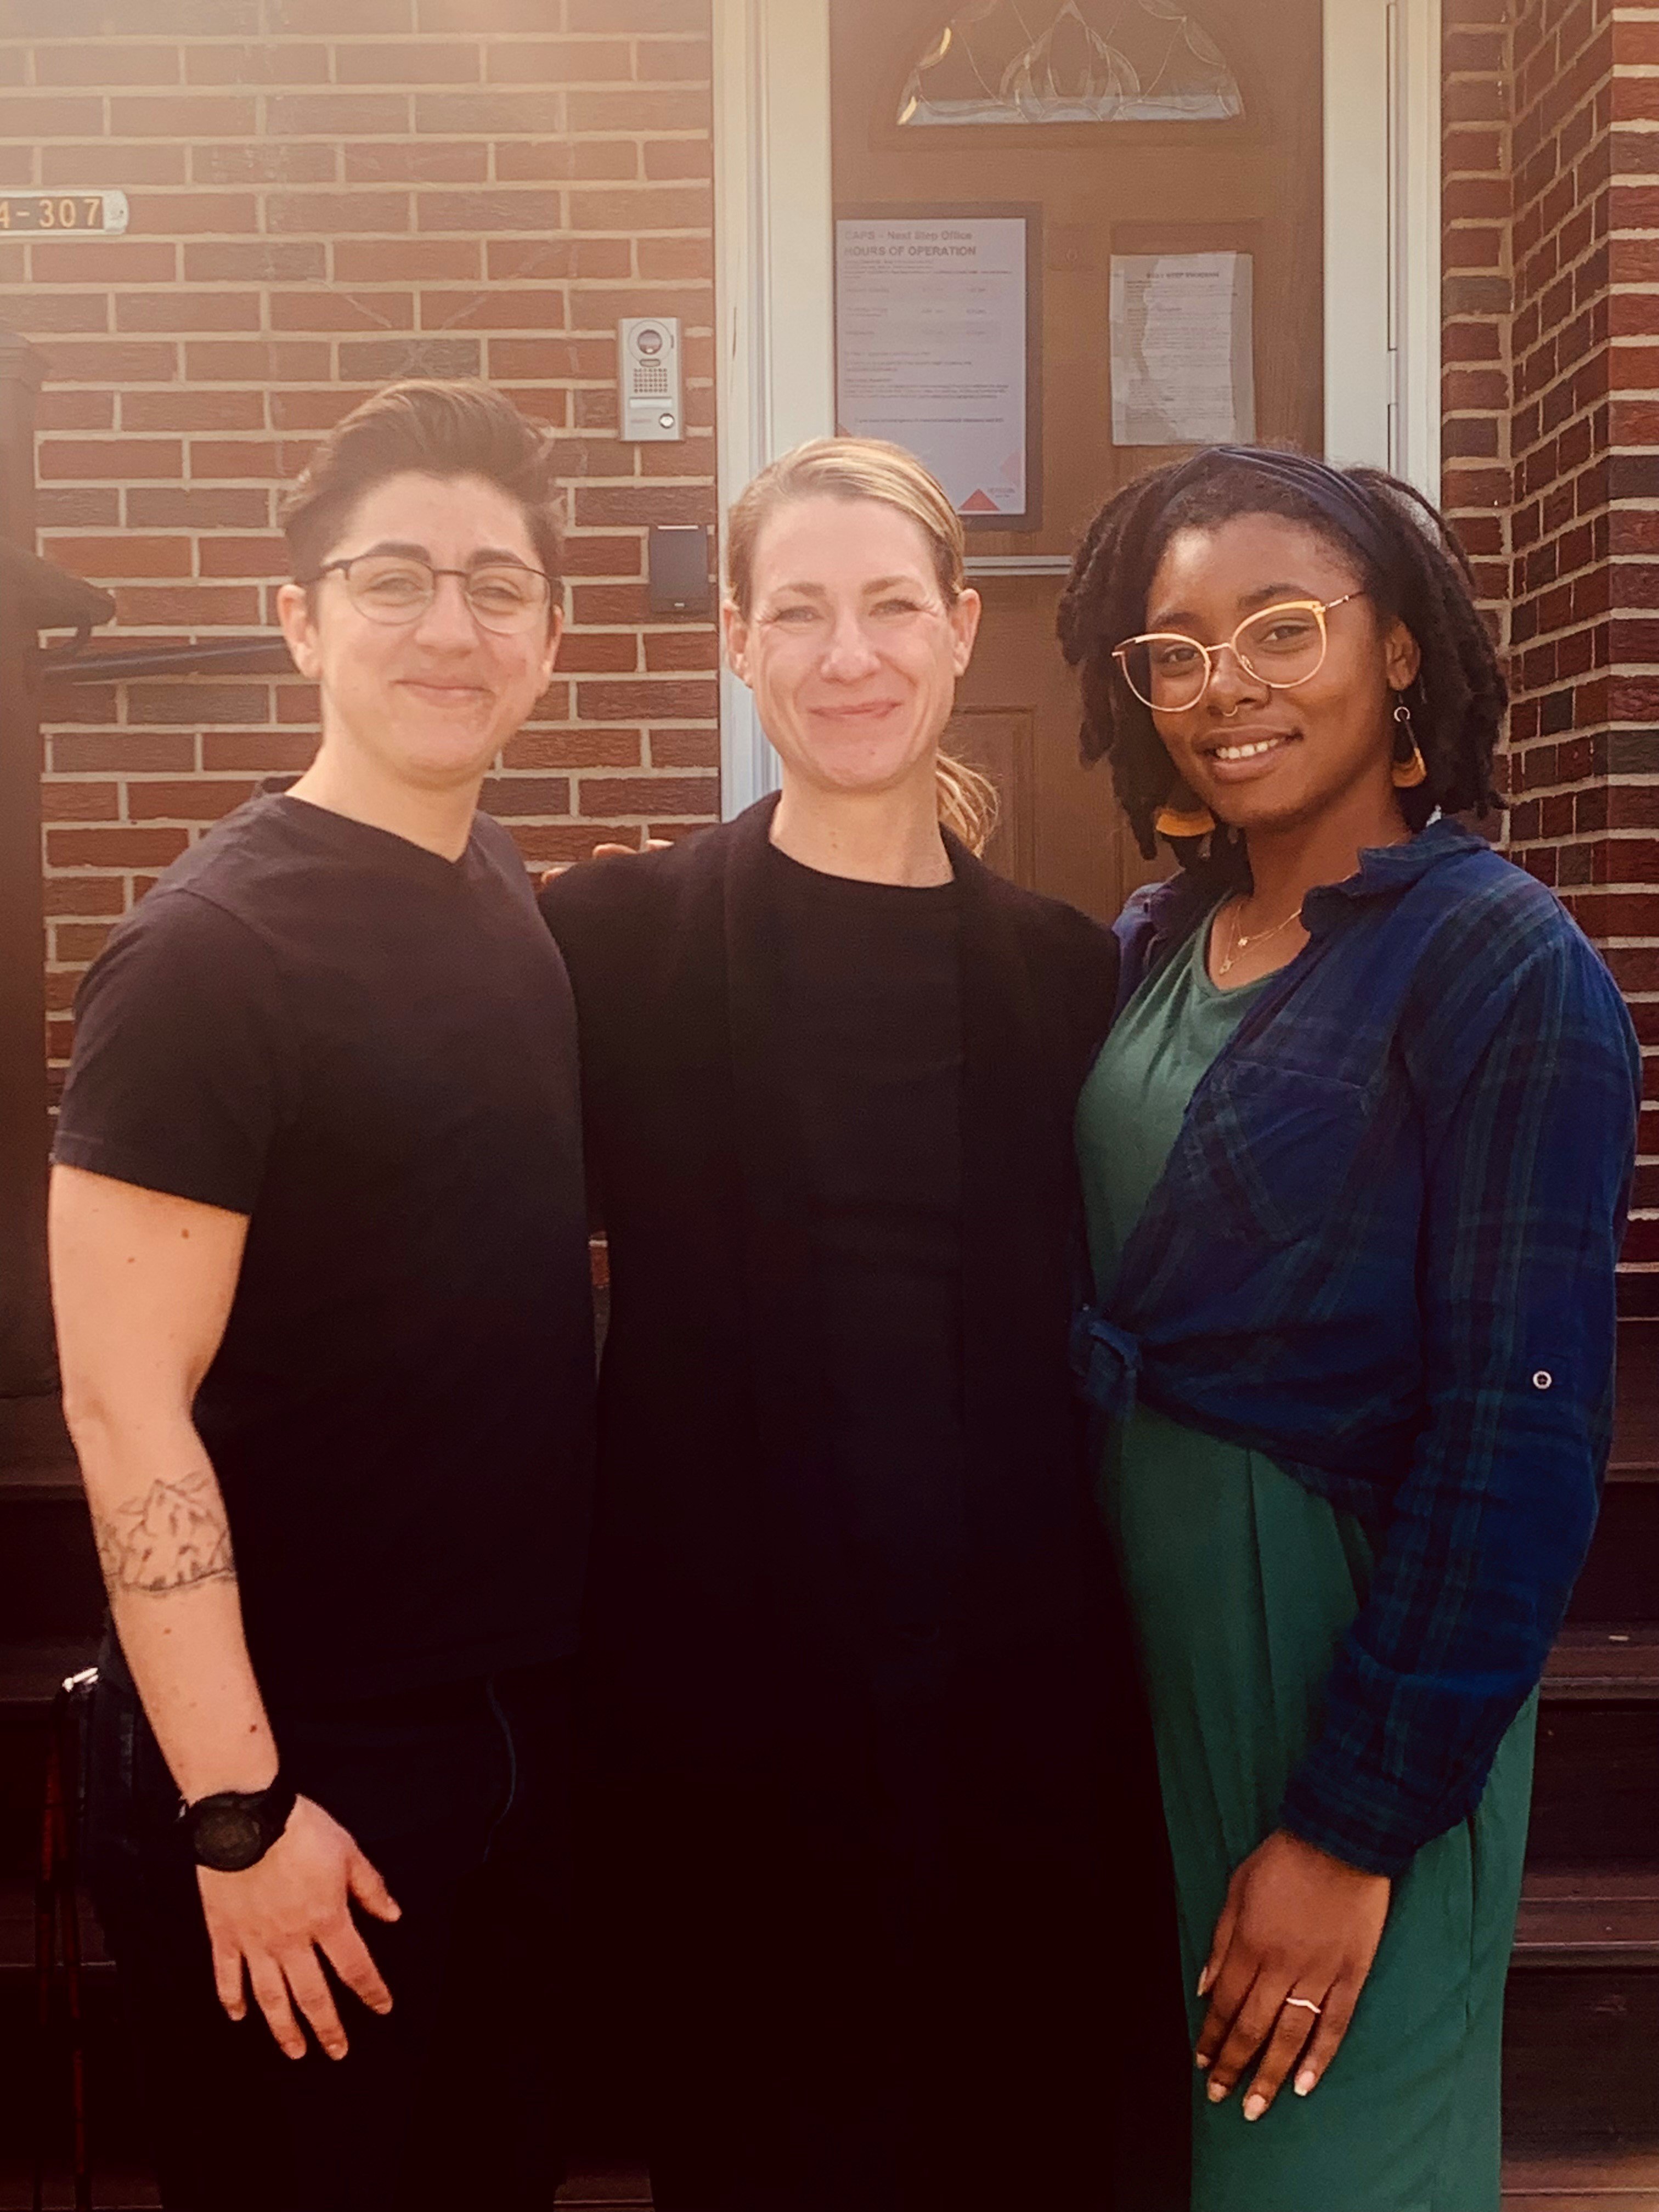 Next Step staff Zan Haggerty, a light-skinned person with short dark hair; Joyce Darakcioglu, a light-skinned woman with blond hair; and Jhonel Richards, a dark-skinned woman with shoulder-length locs and glasses, smile for a photo.